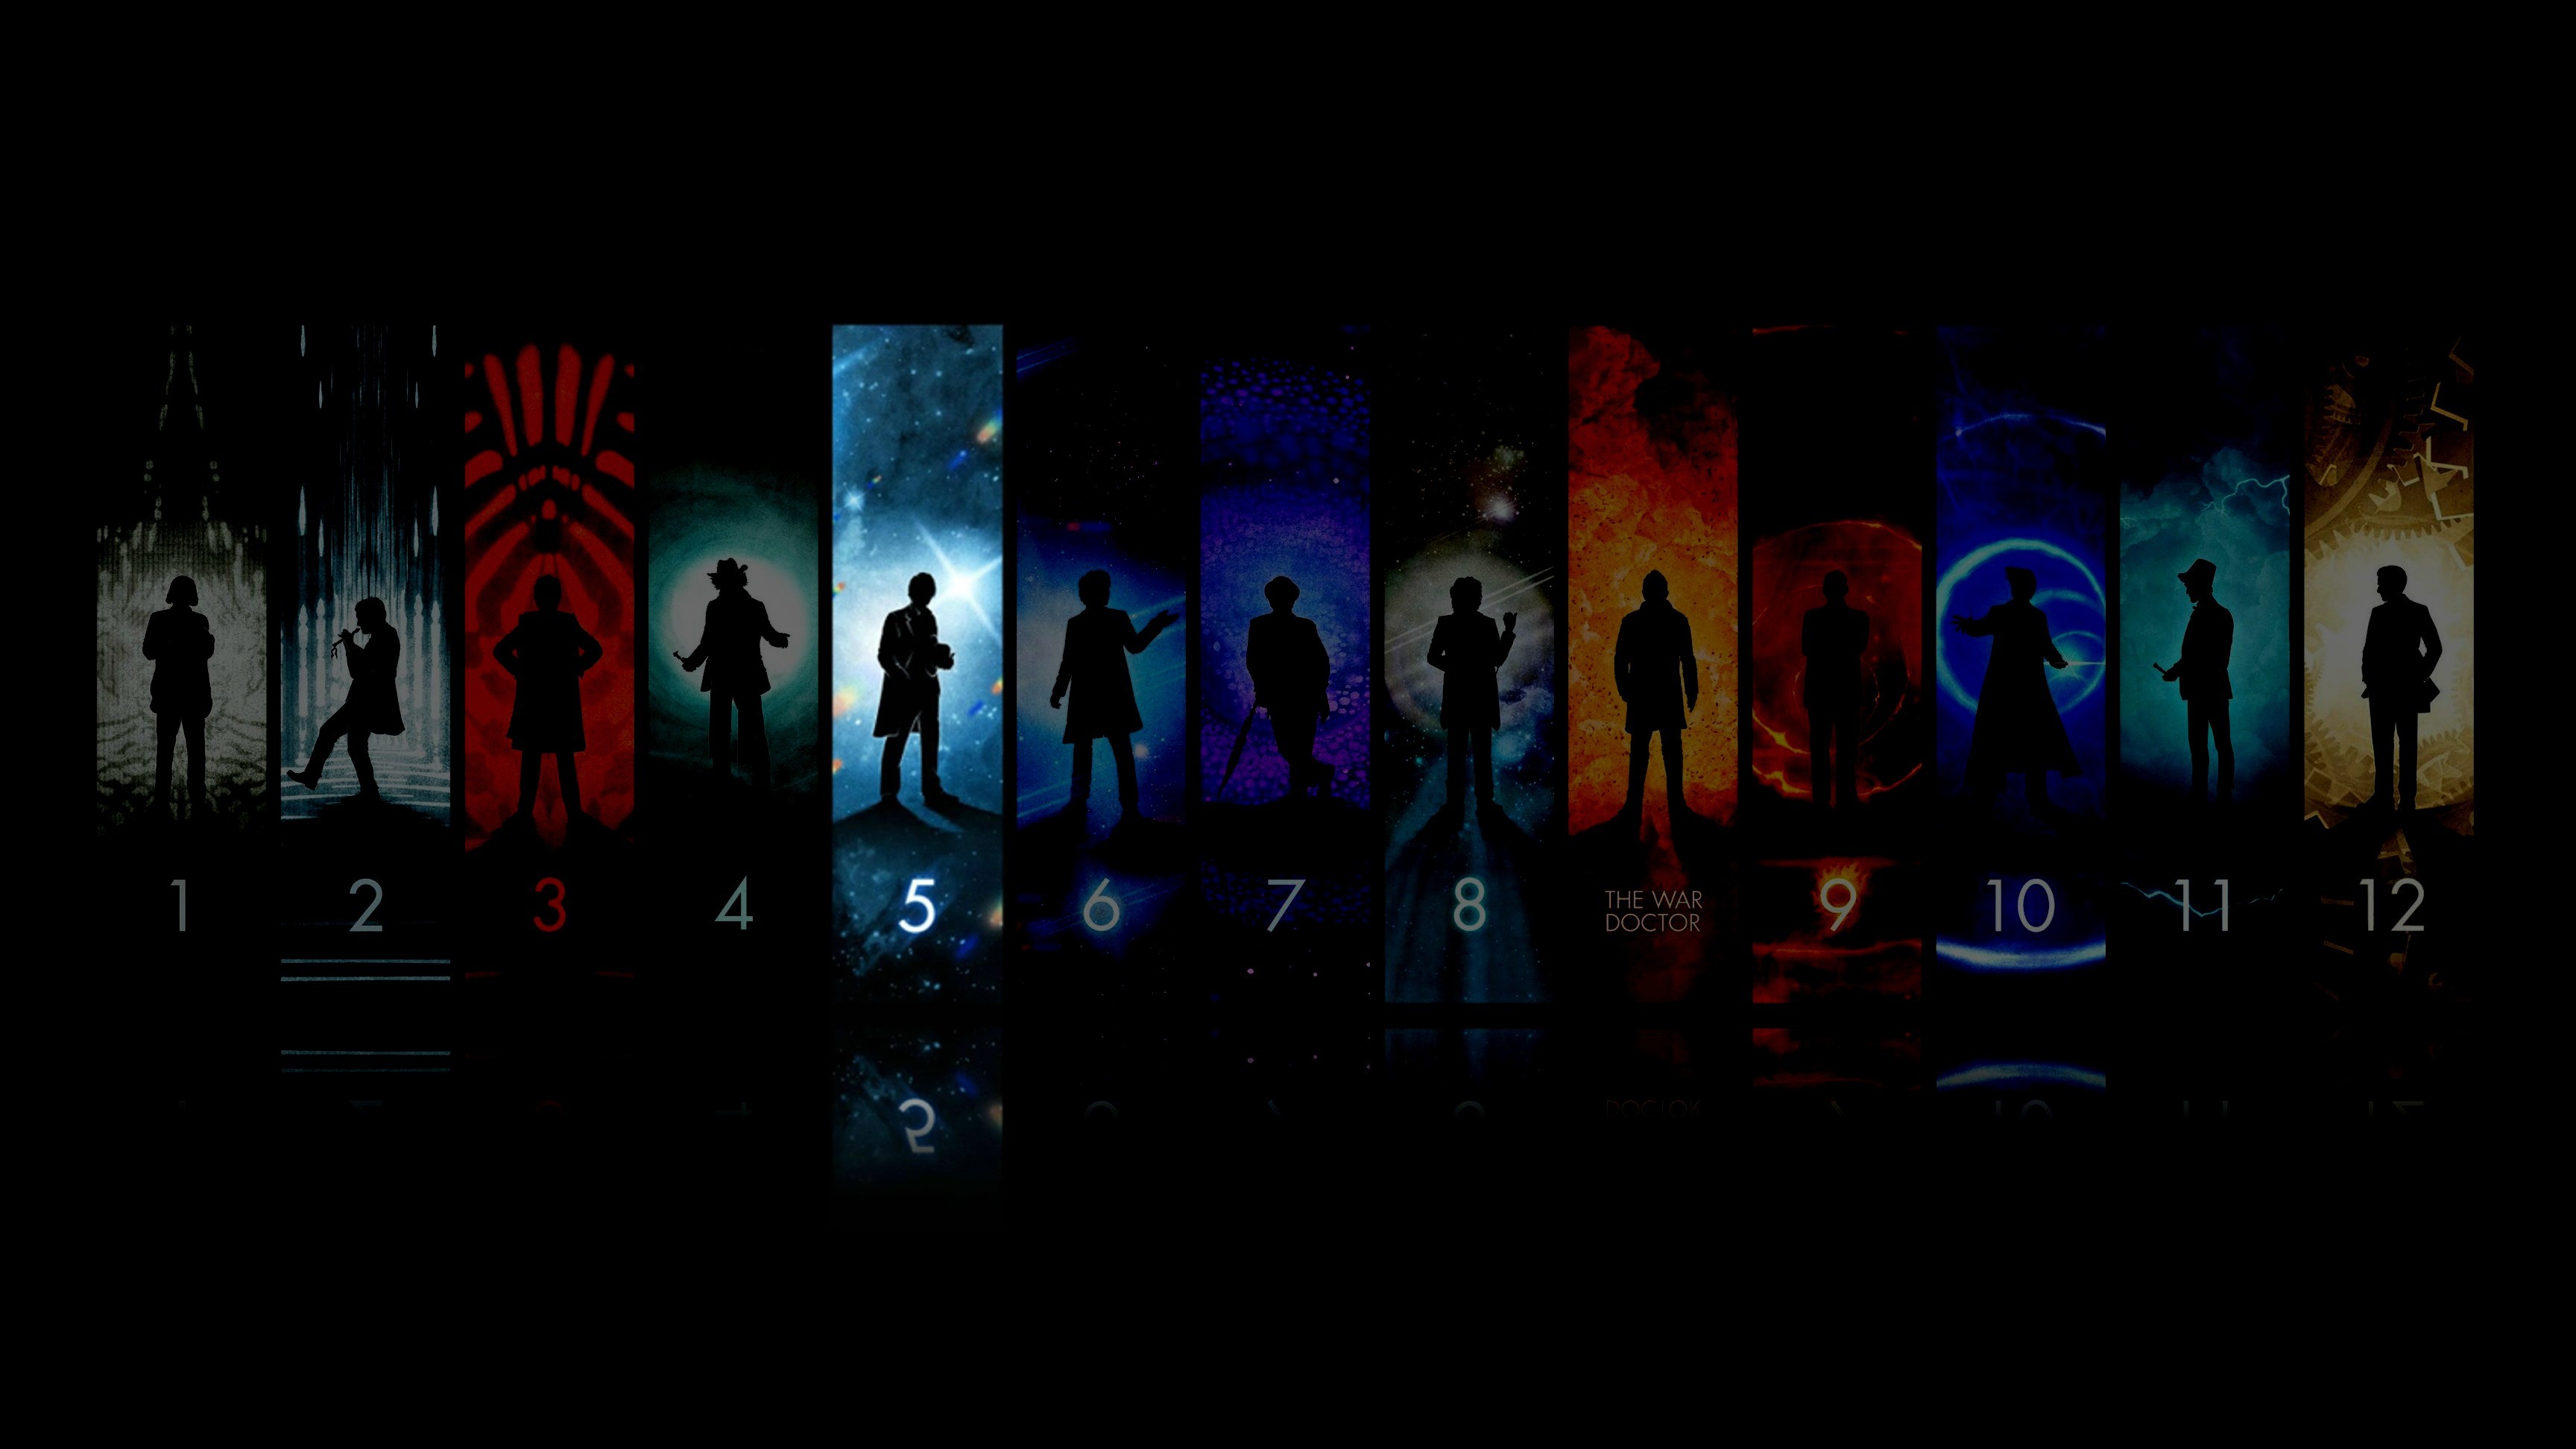 General 3456x1944 Doctor Who numbers collage TV series dark science fiction digital art simple background black background